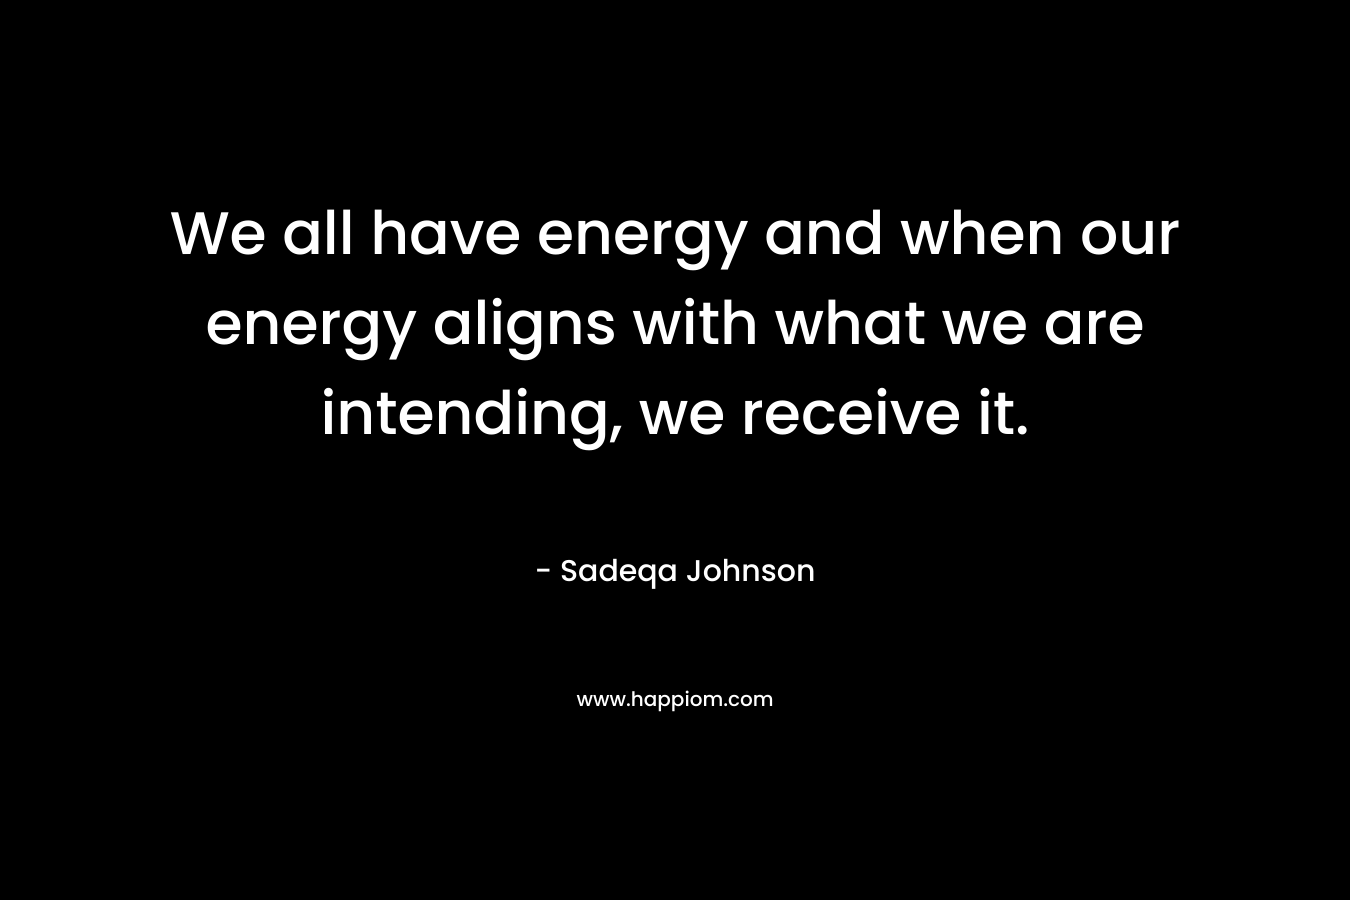 We all have energy and when our energy aligns with what we are intending, we receive it.